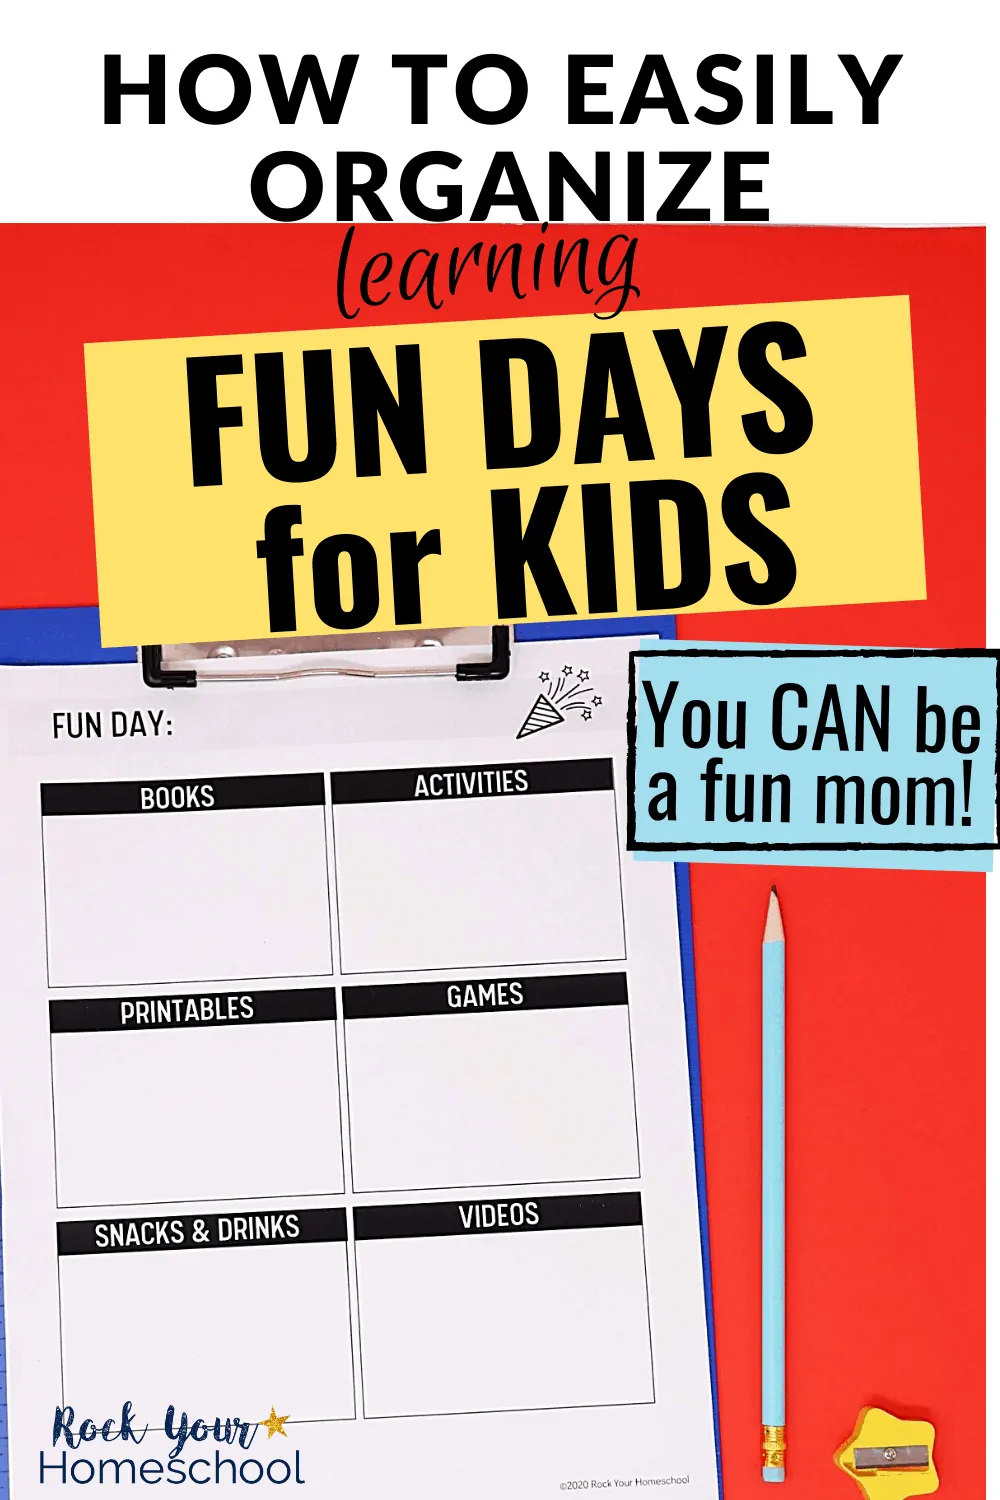 How to Easily Organize Learning Fun Days for Kids